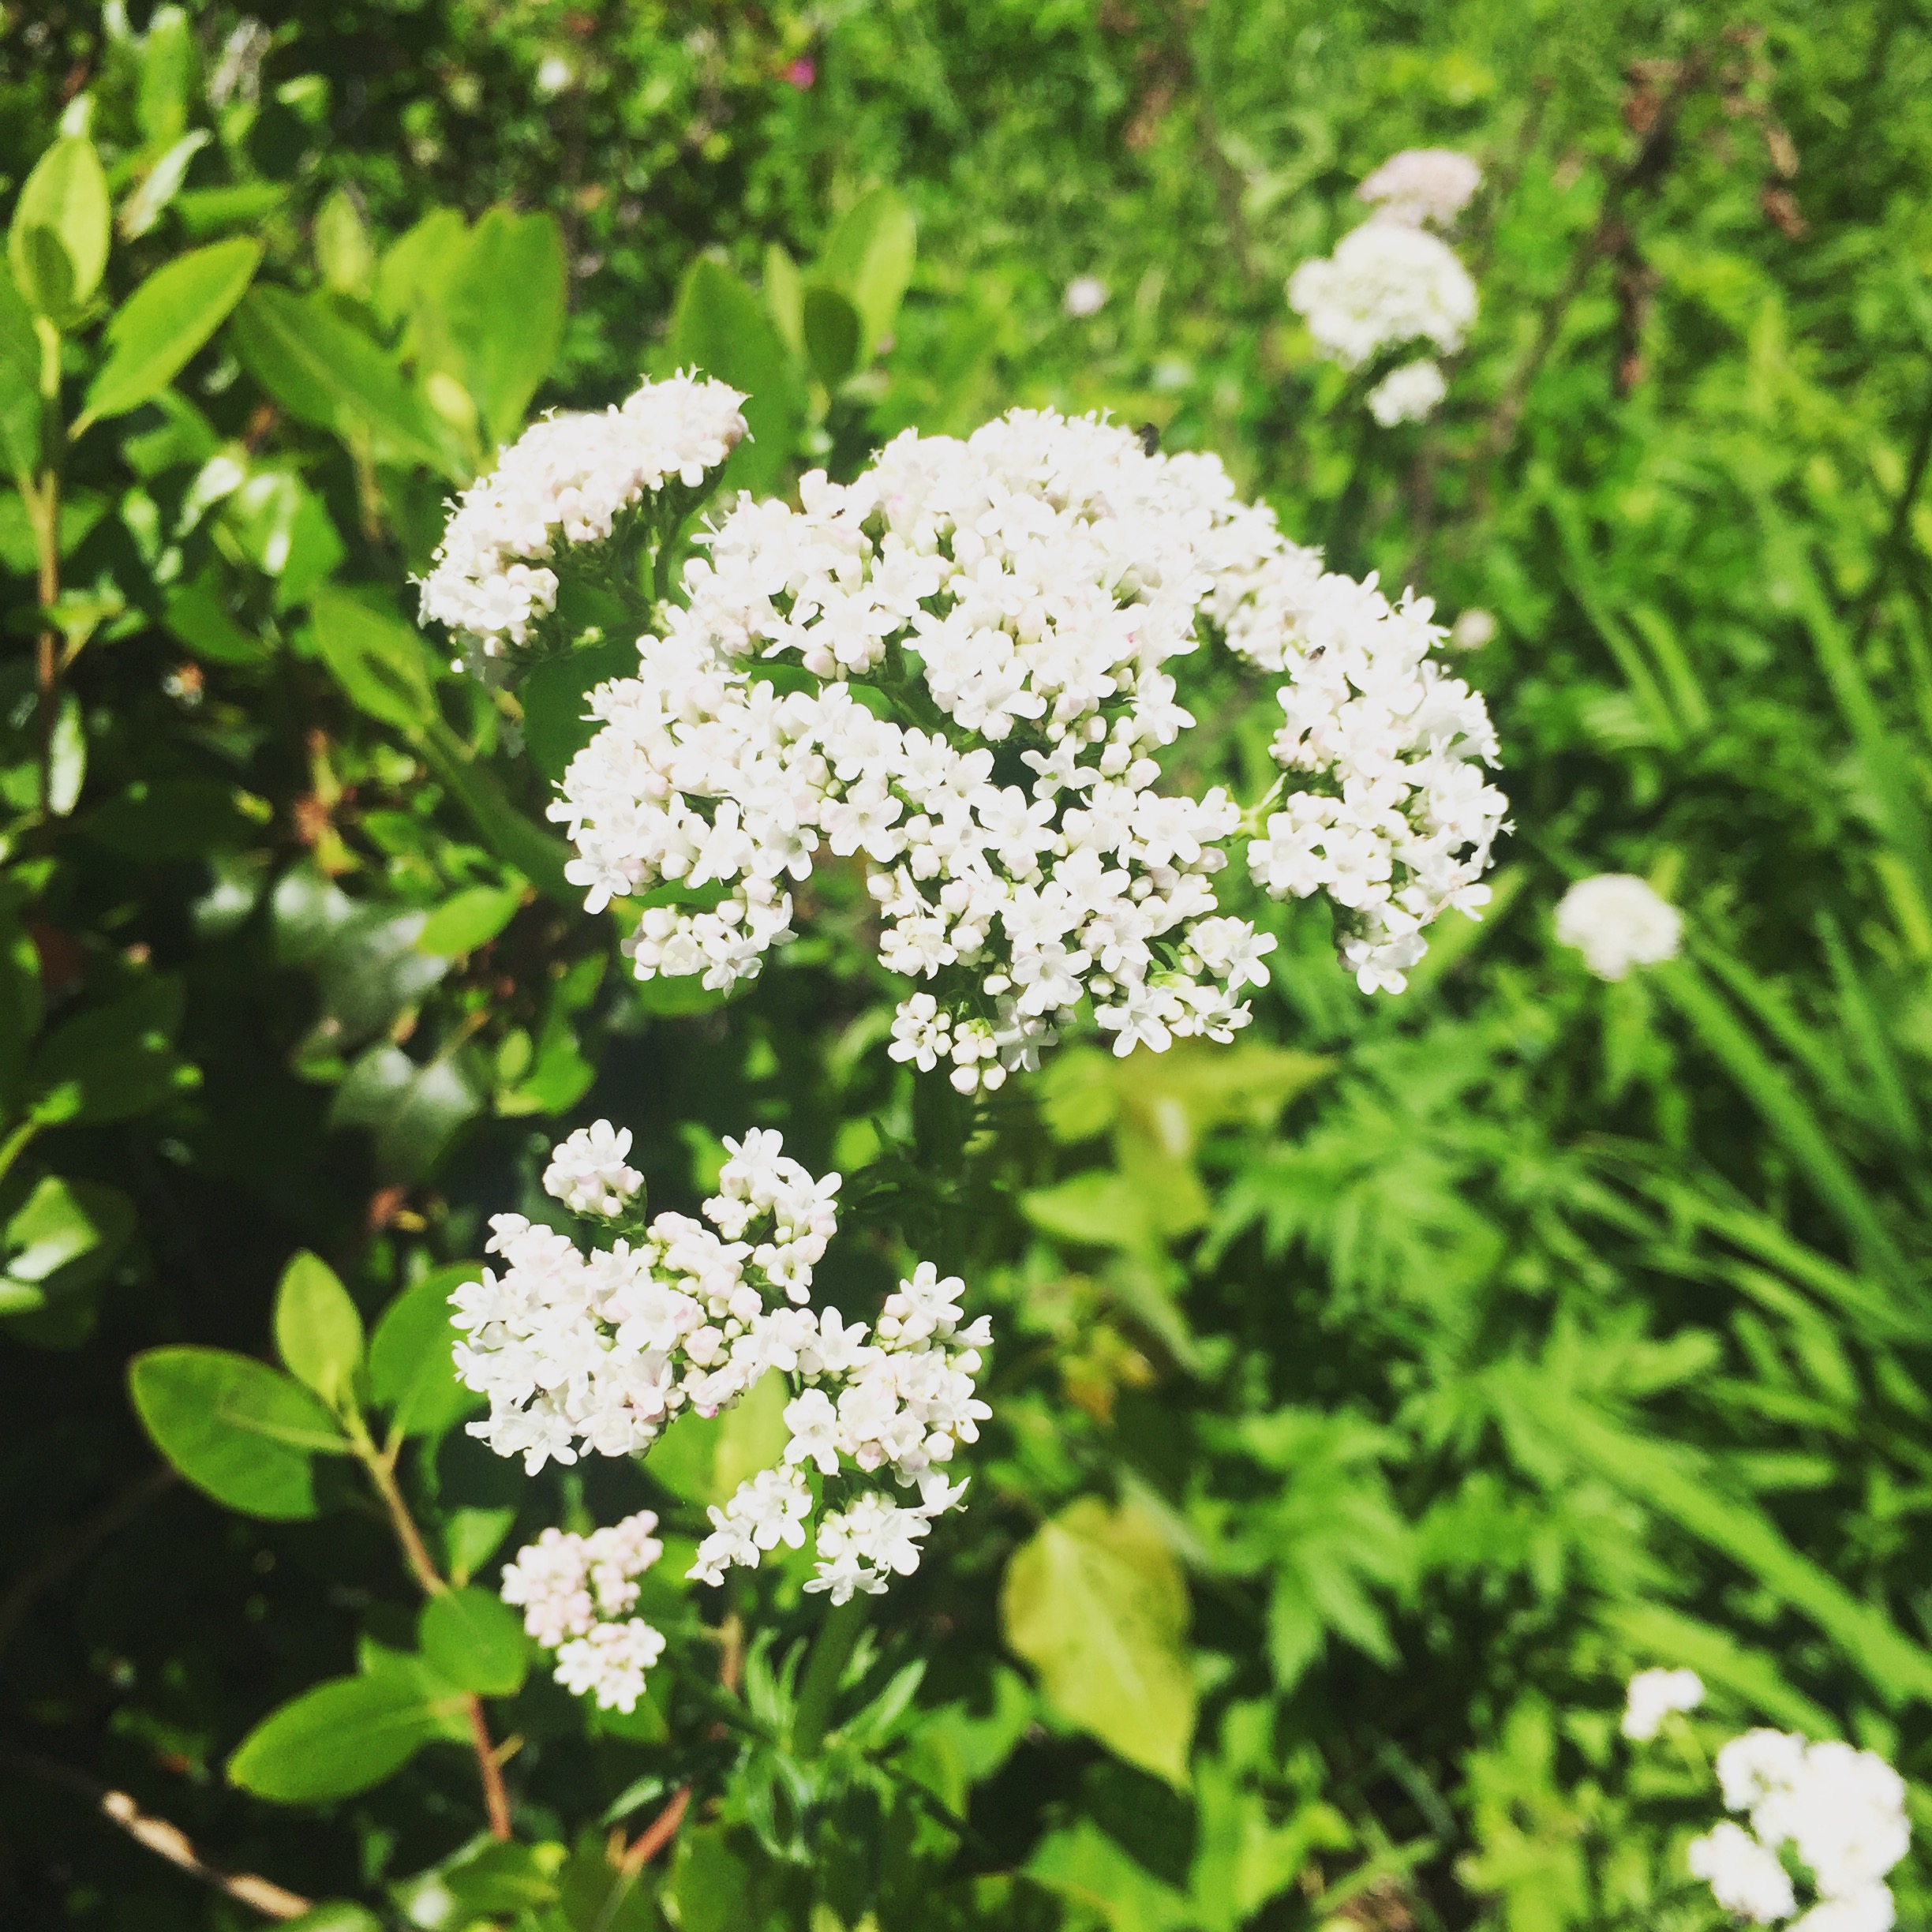  The valerian is reaching for the sun today. Tall and stately, these plants pop up all over the garden — even right out of the lawn! A strong medicine, in more ways than one. 